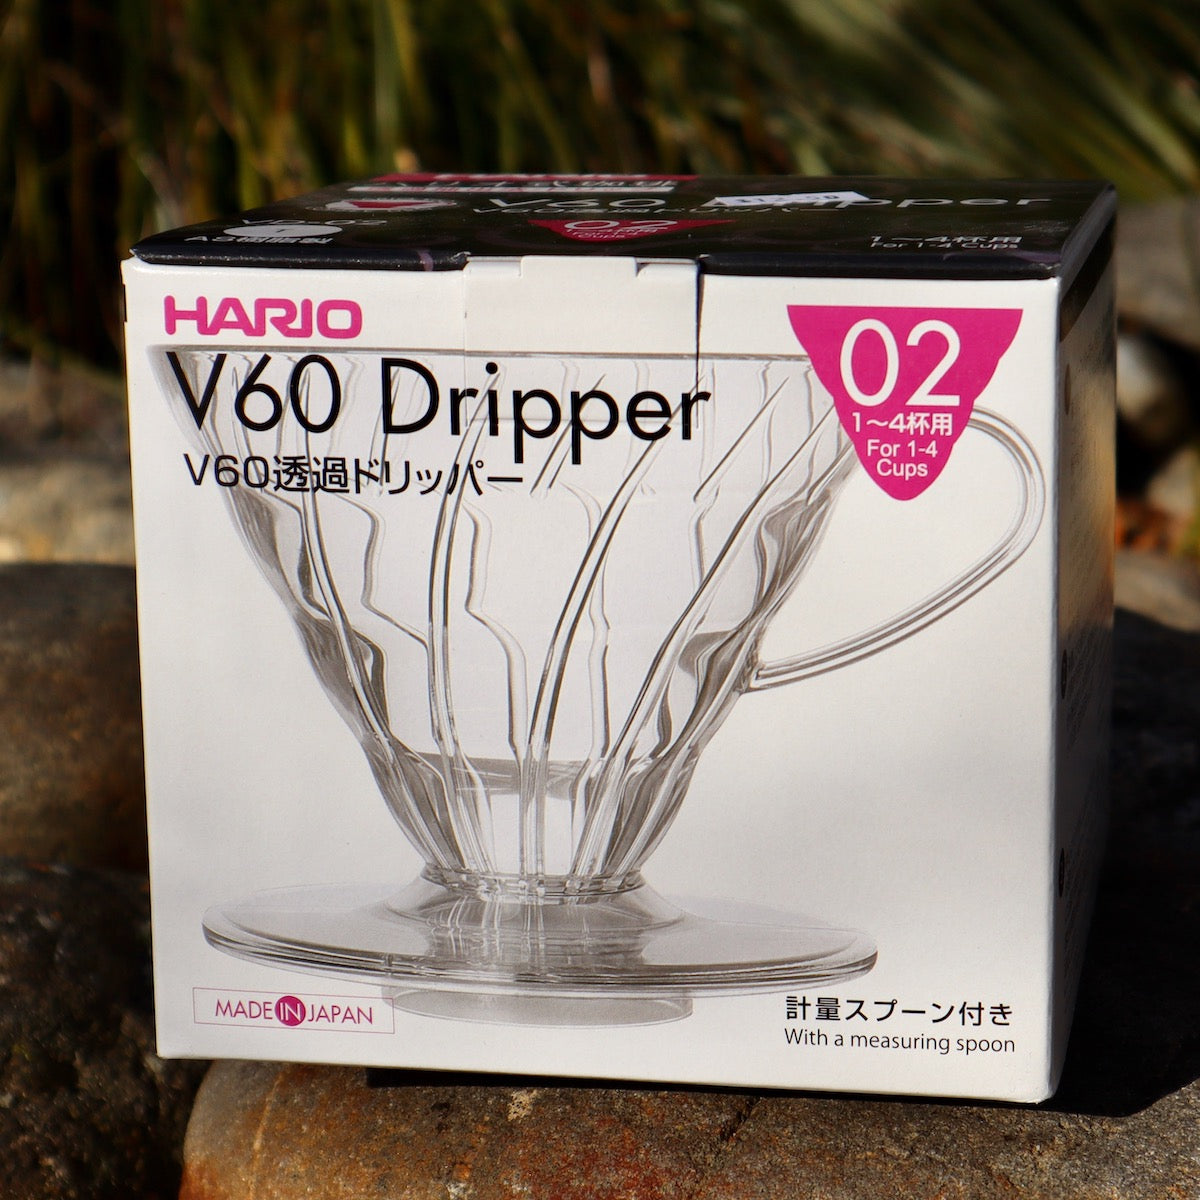 Hario V60 02 Dripper Coffee Filters from The Town Roaster